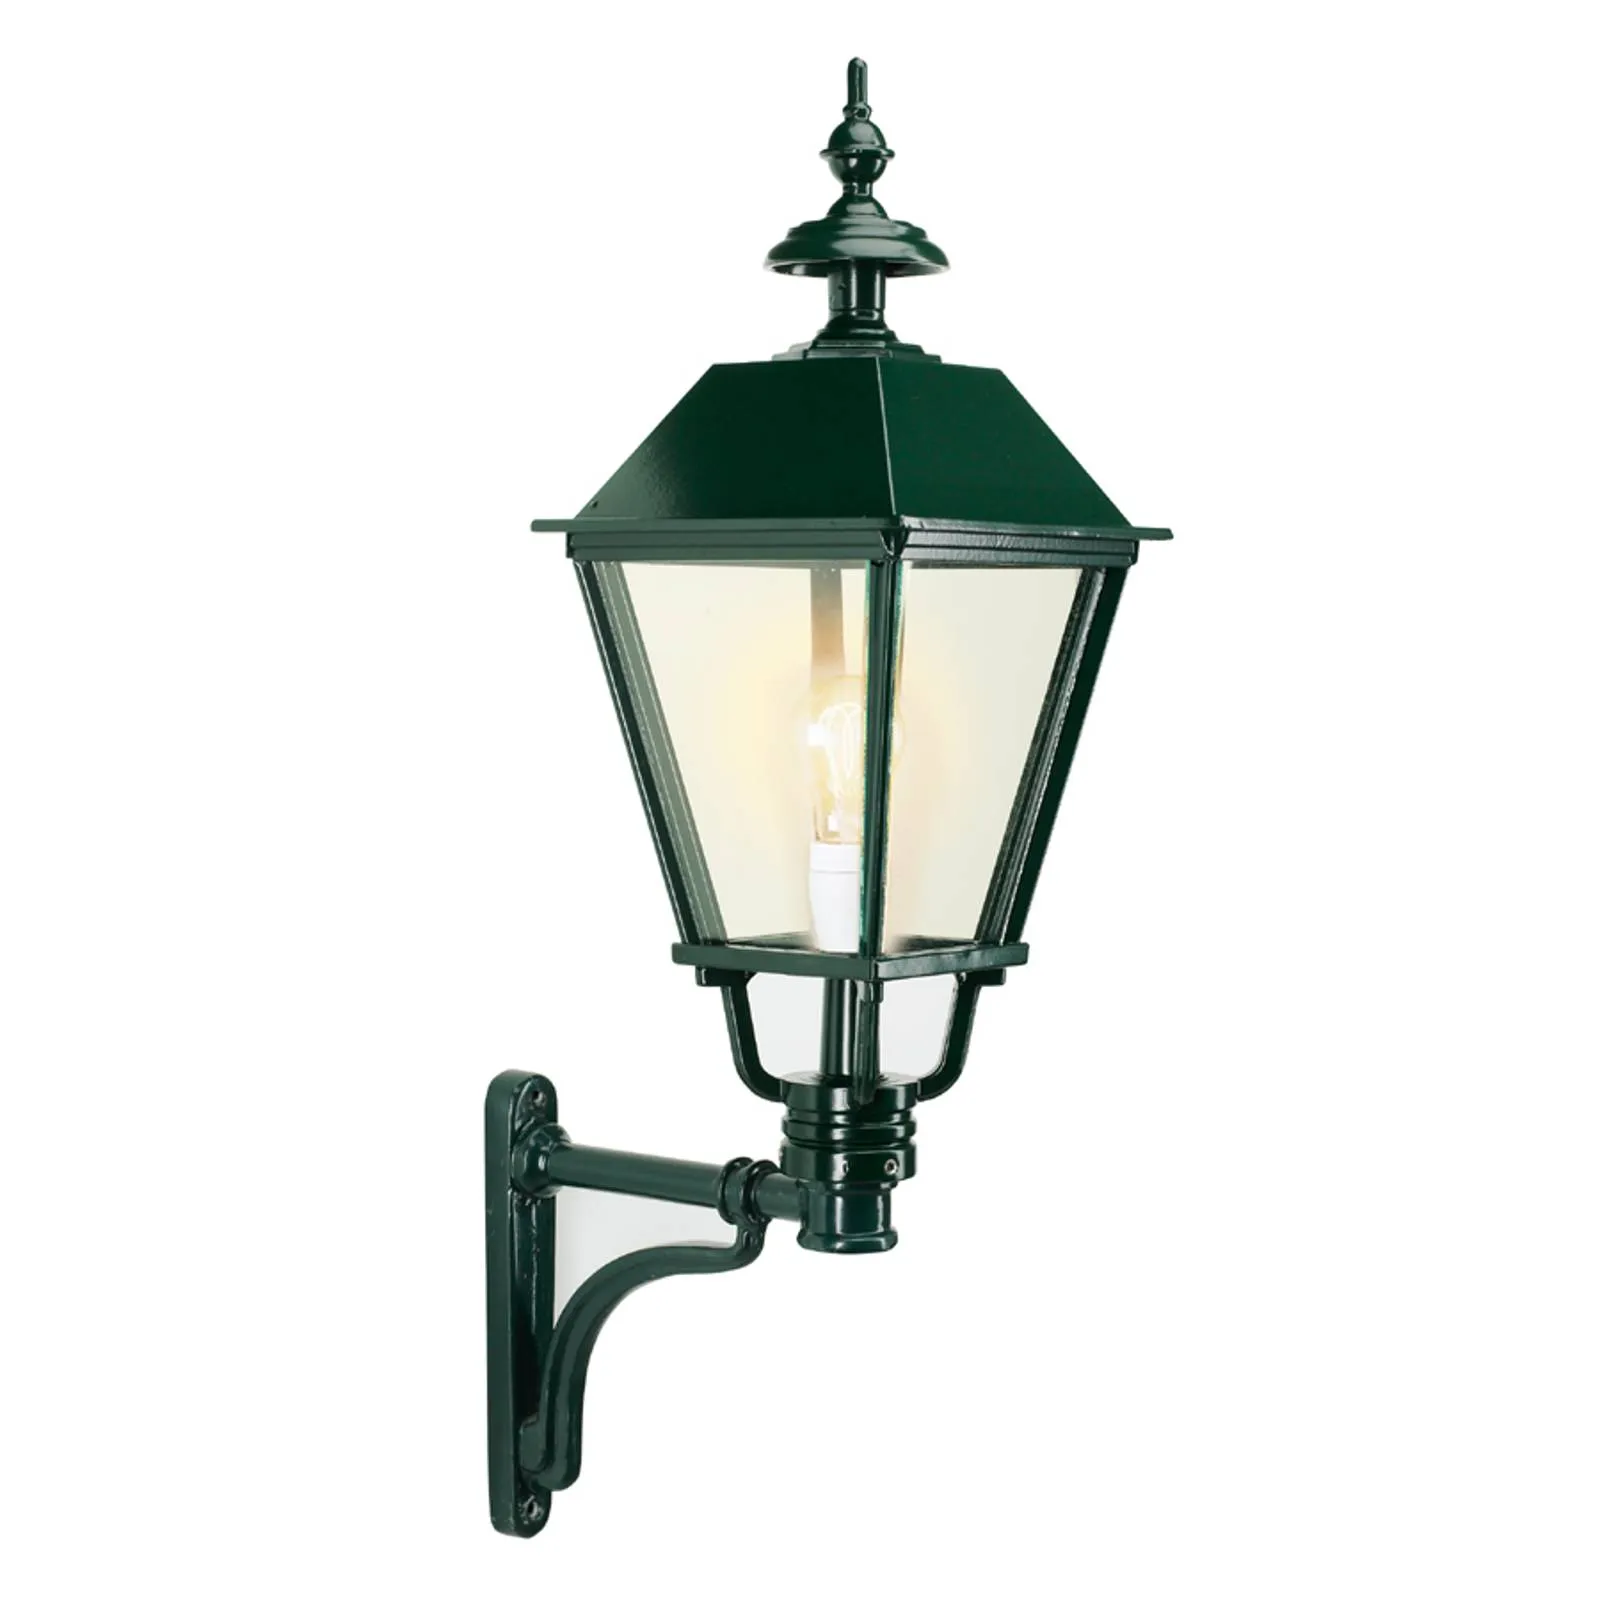 Classic outdoor wall light Eemnes, green